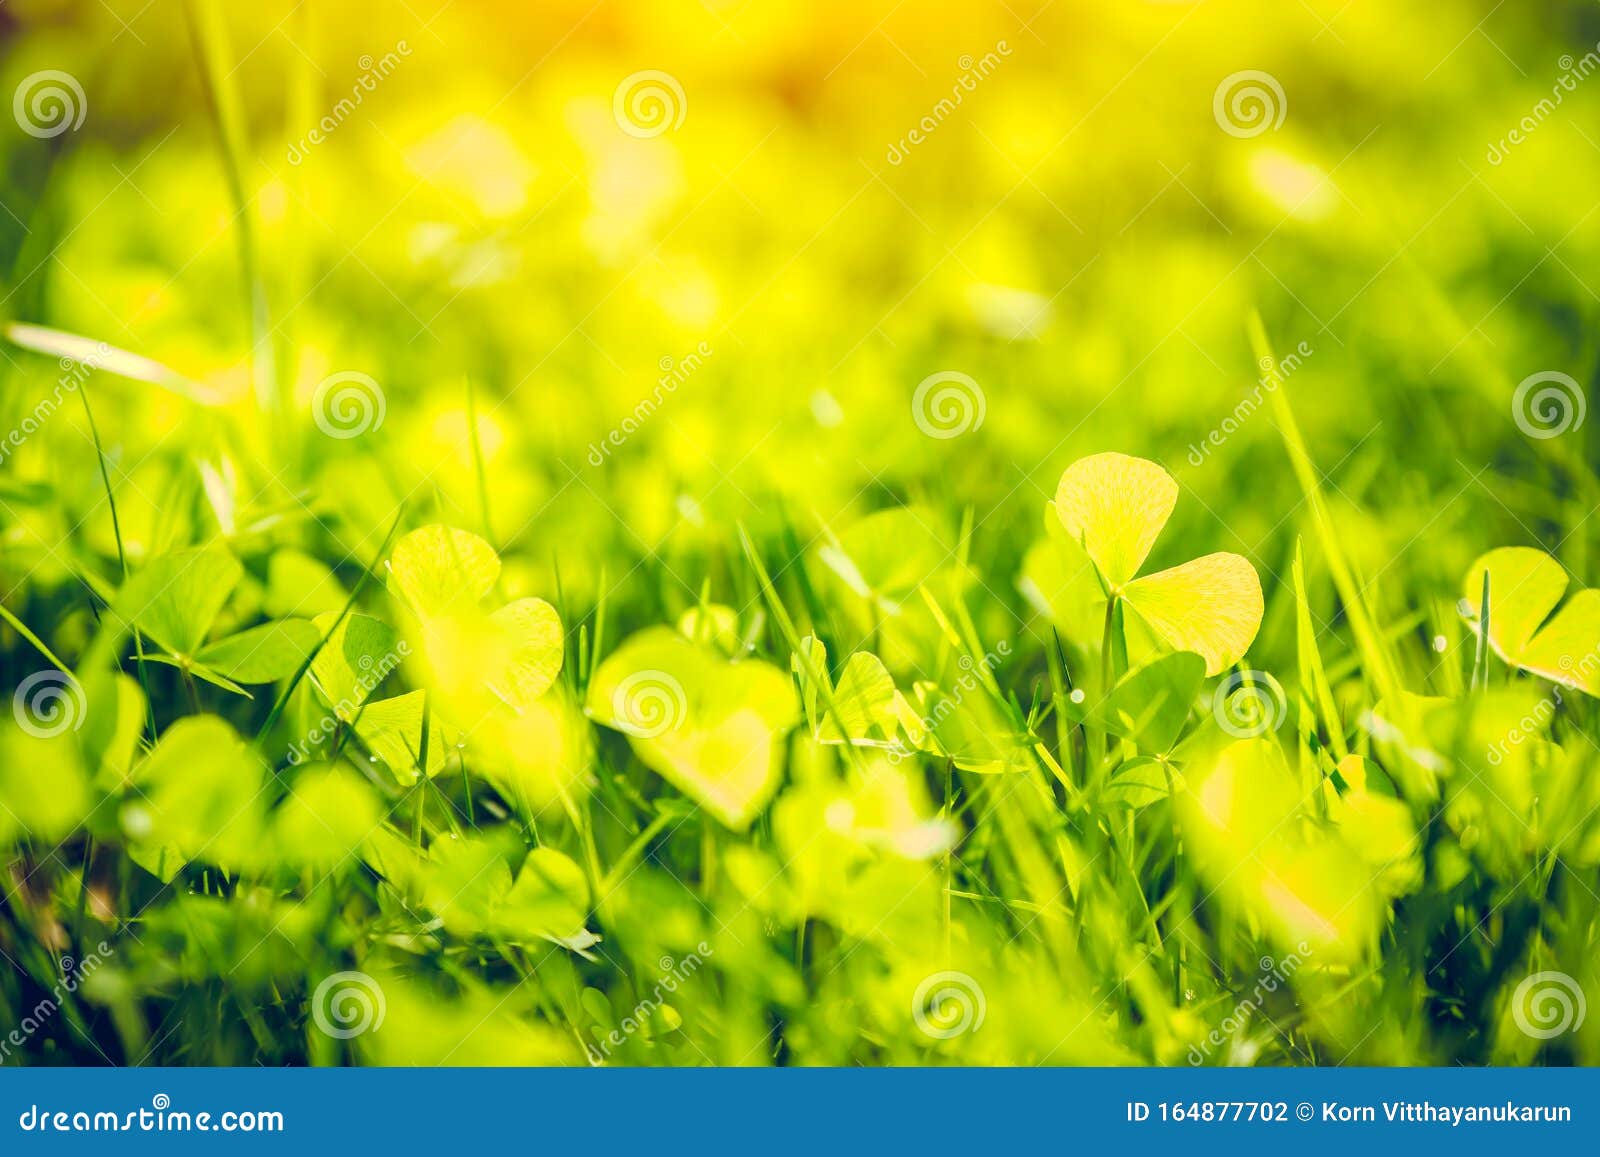 Green Plant Nature Blur for Background Postcard Wallpaper Stock Photo -  Image of drop, green: 164877702